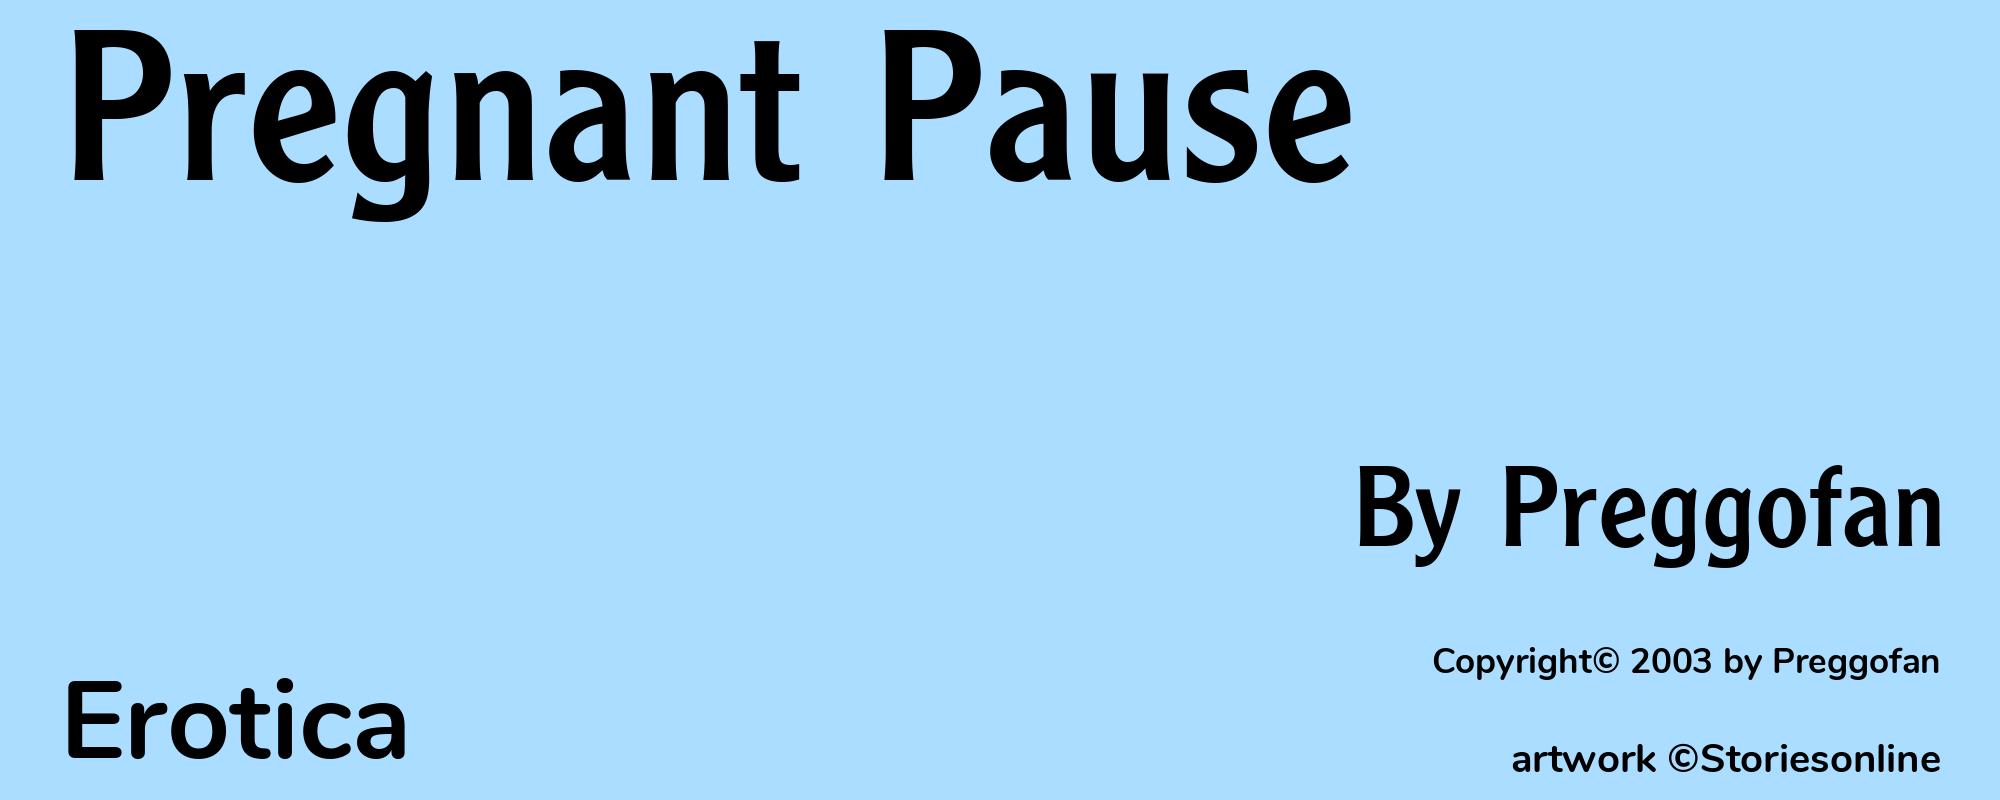 Pregnant Pause - Cover